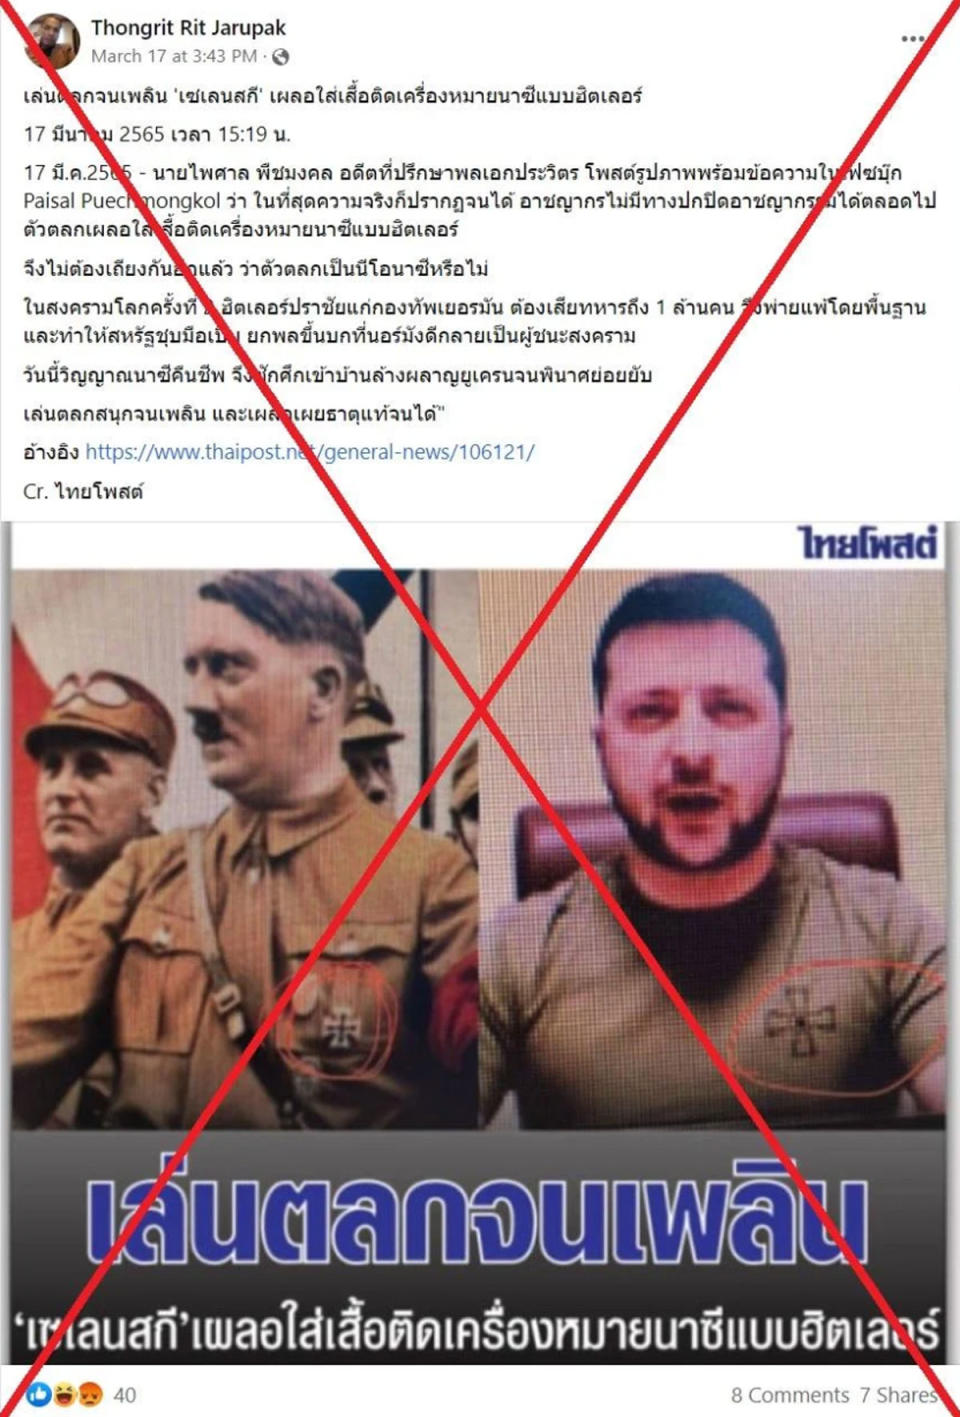 Screenshot of the misleading Facebook post about Zelensky's shirt, with a red cross through it to show the claim is false. 